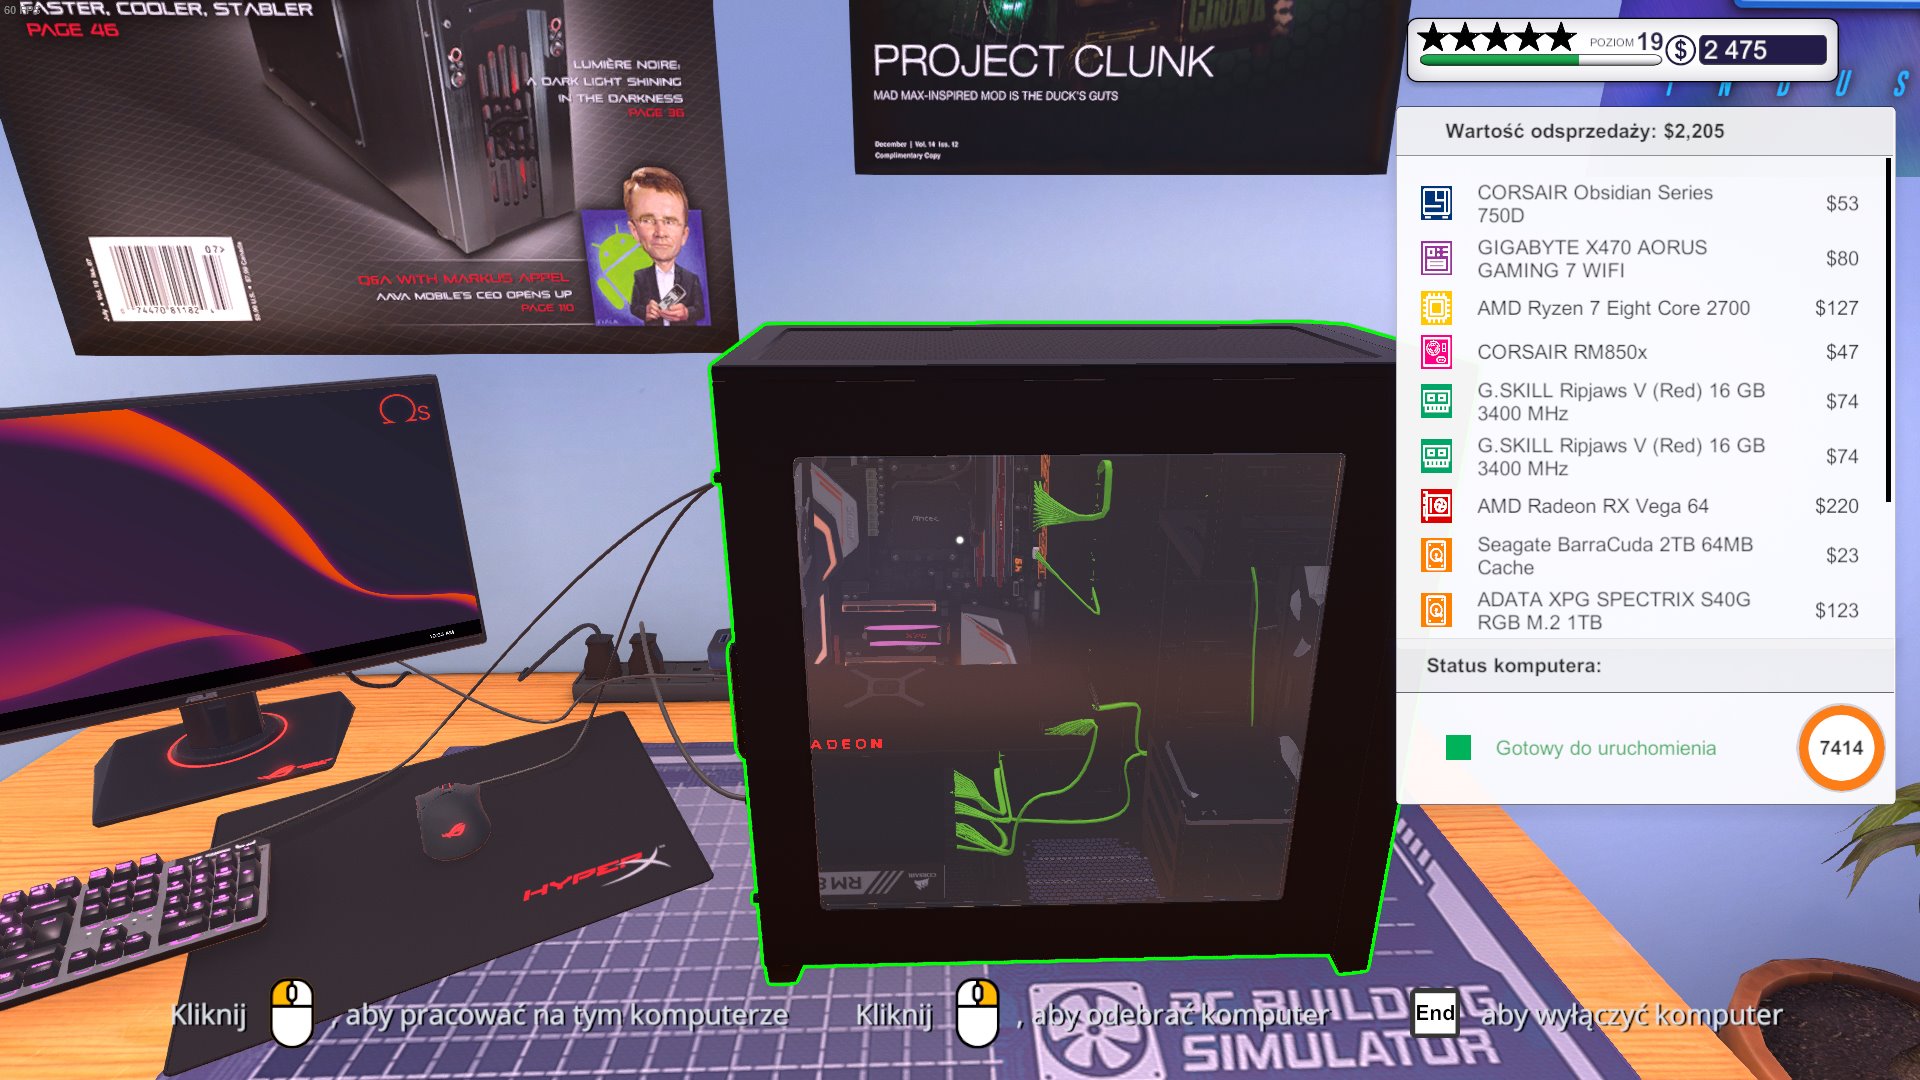 Going loopy achievement in PC Building Simulator